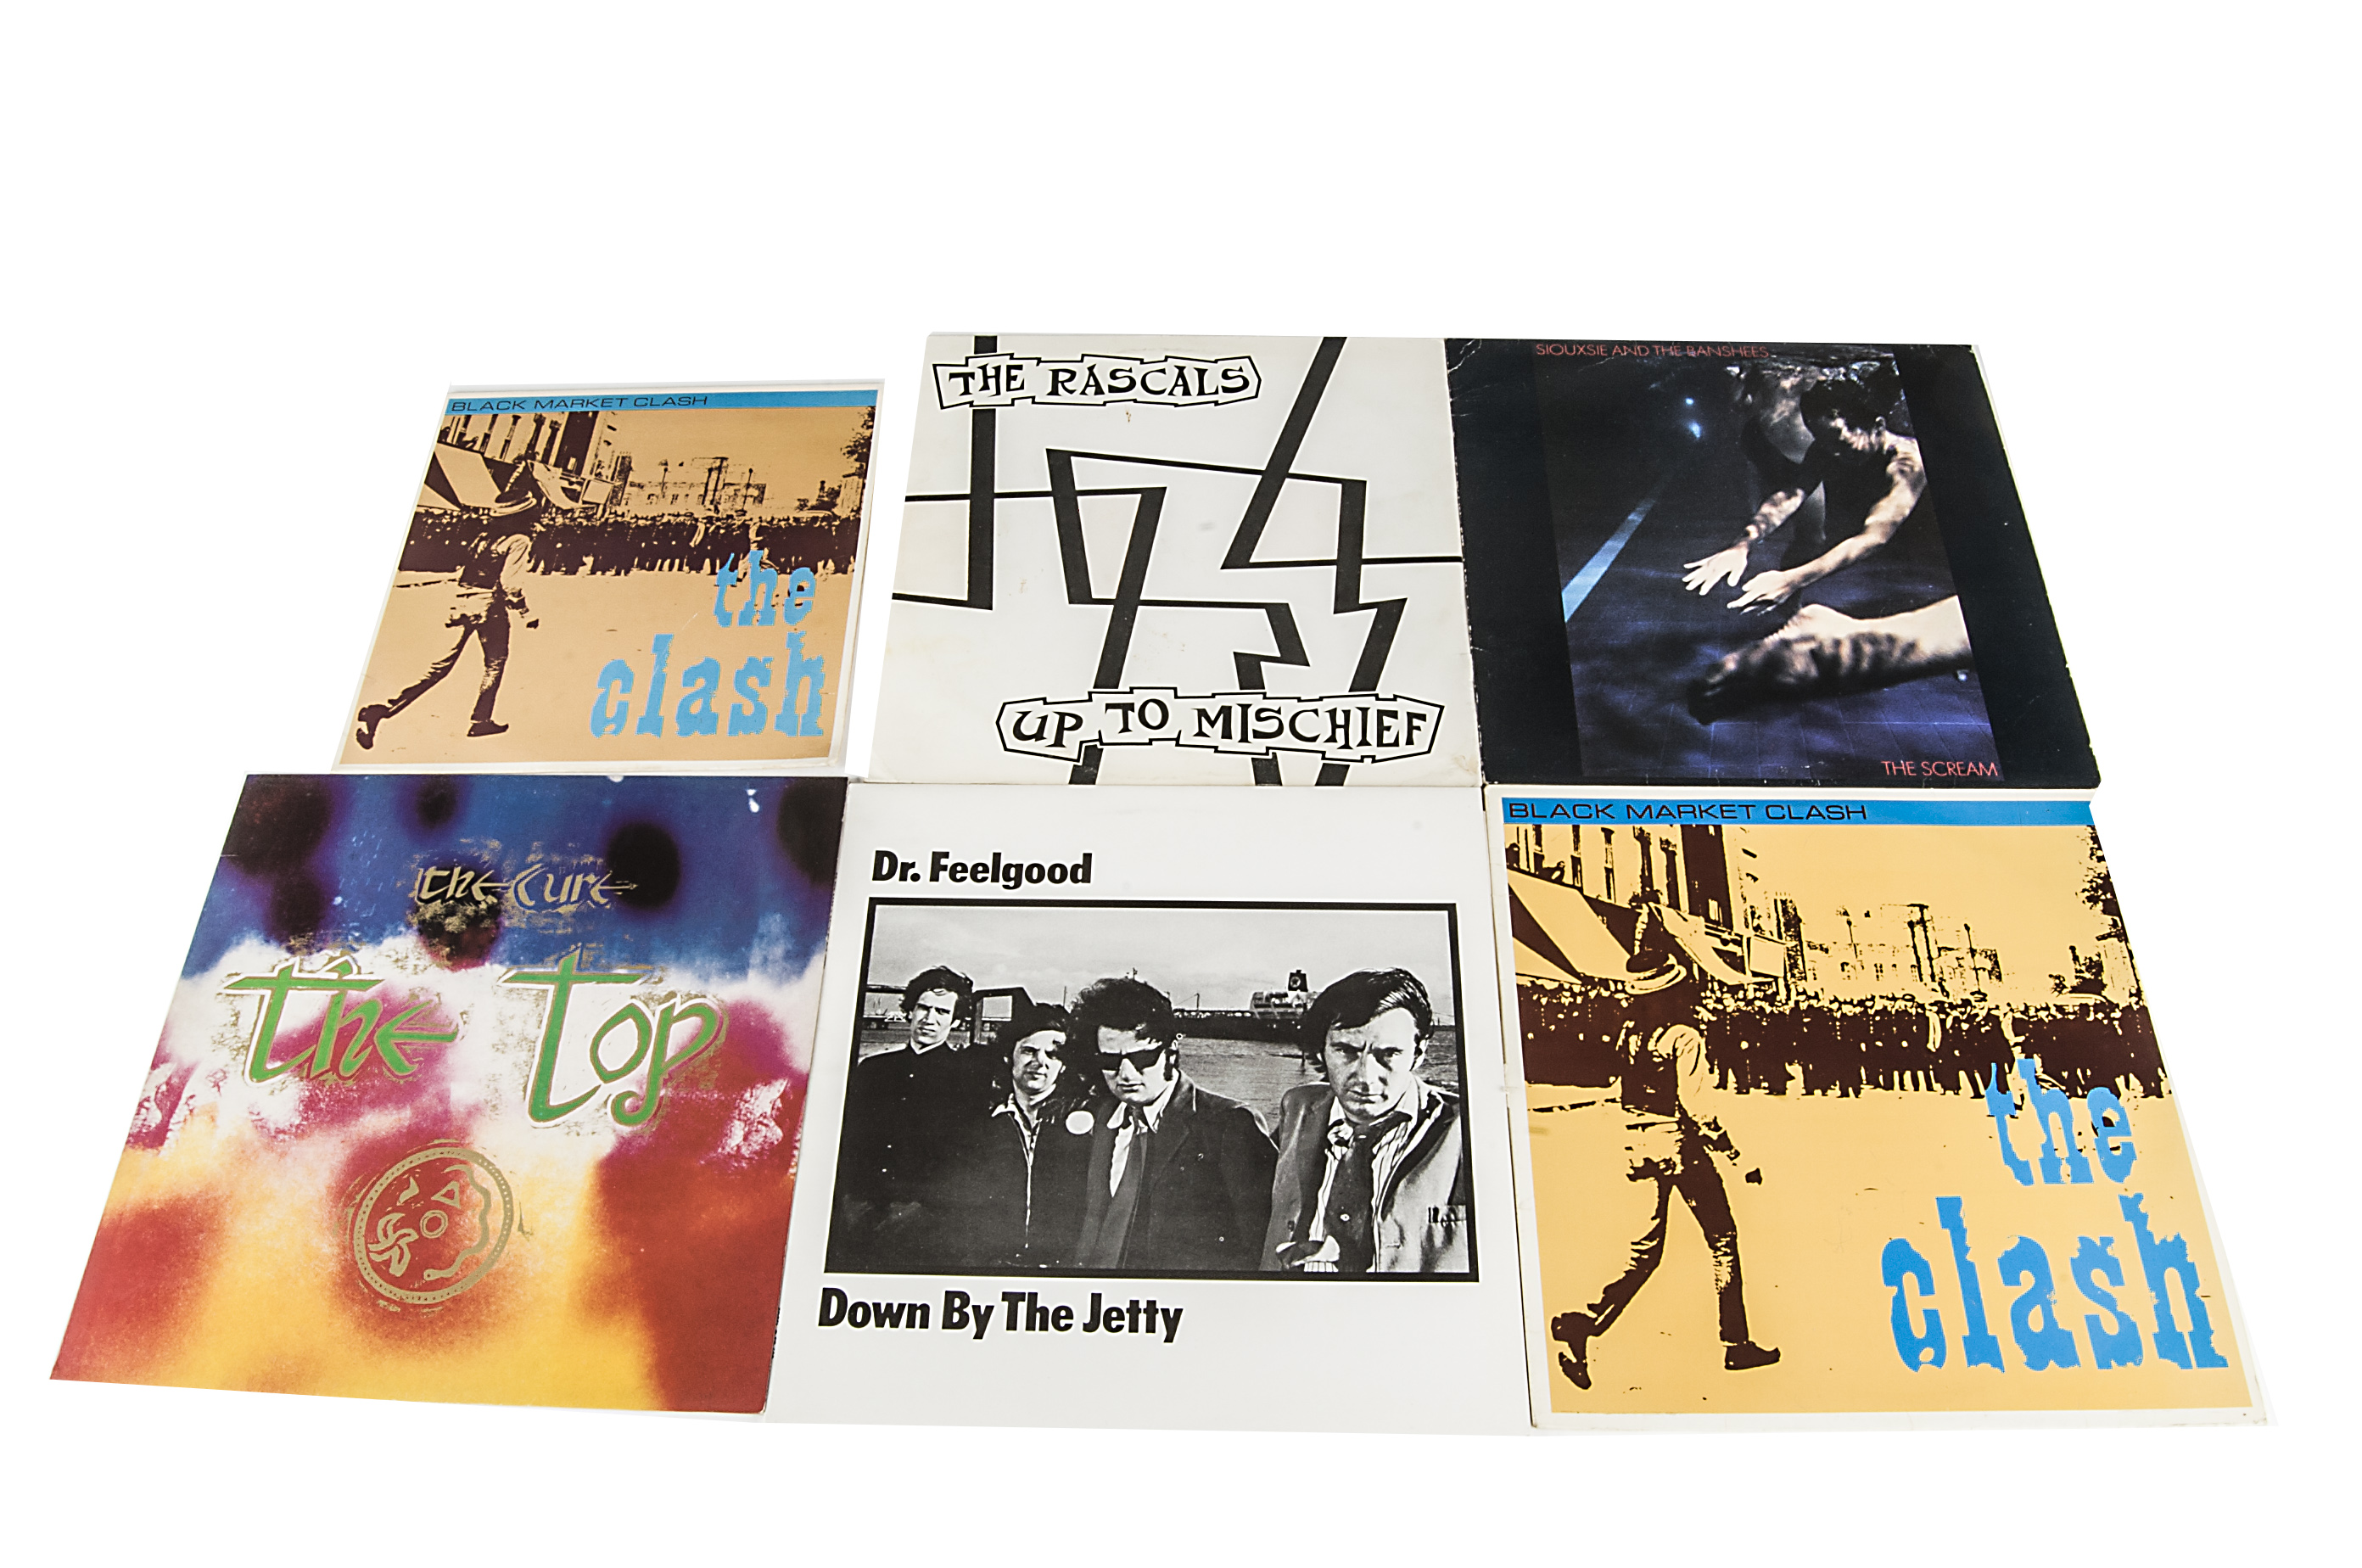 Punk / New Wave LPs / 12" singles, approximately fifty-five albums and fifteen 12" singles of mainly